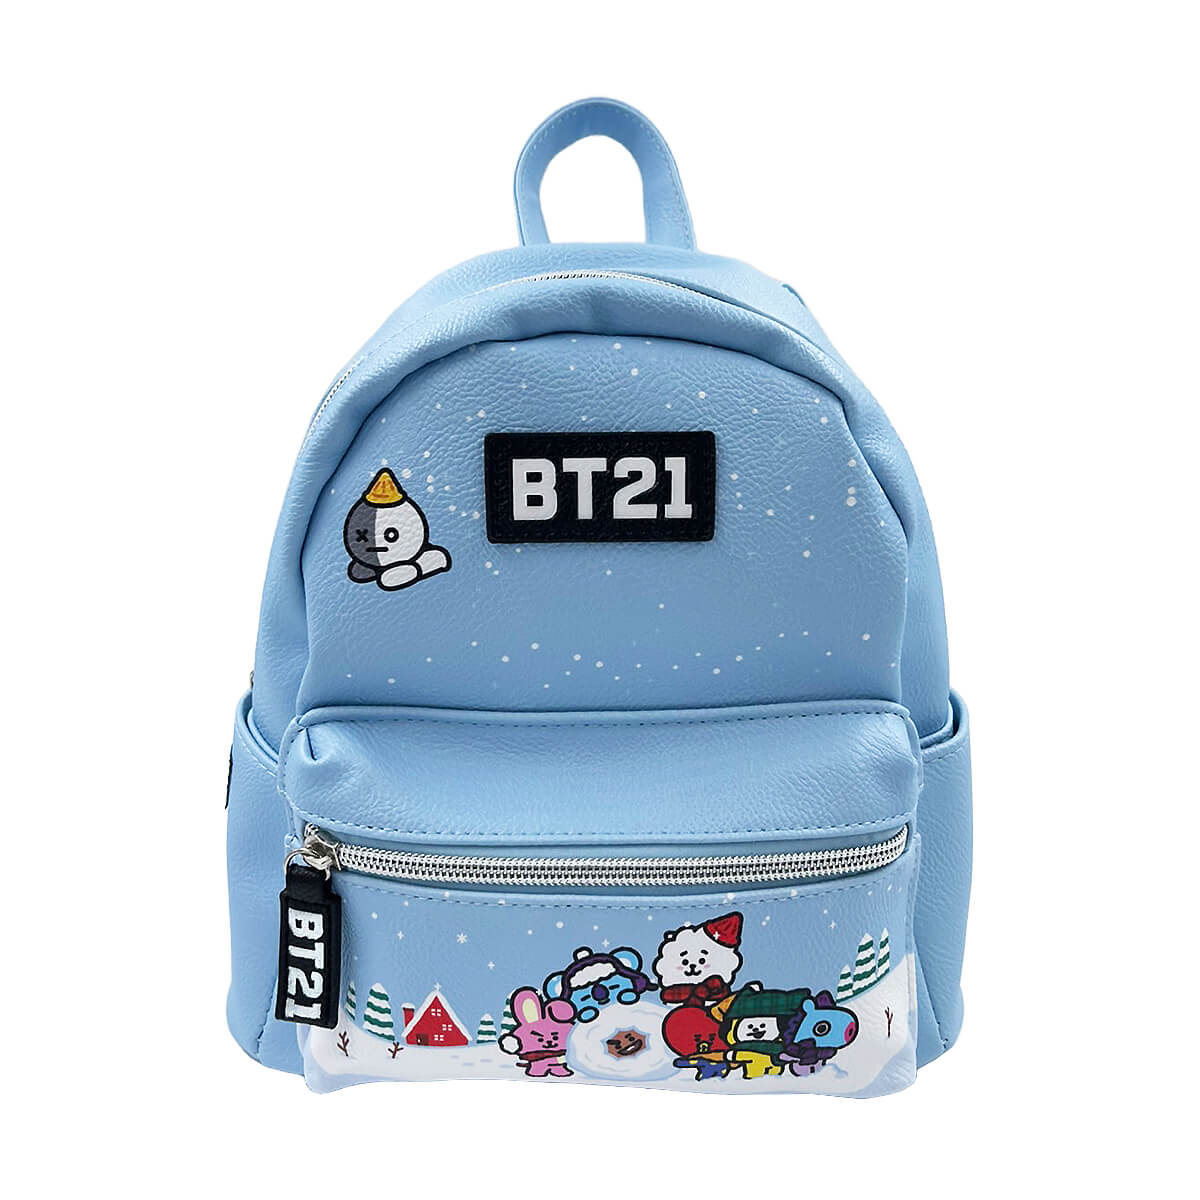 BT21 All Over Print Mini Backpack by Concept One Accessories